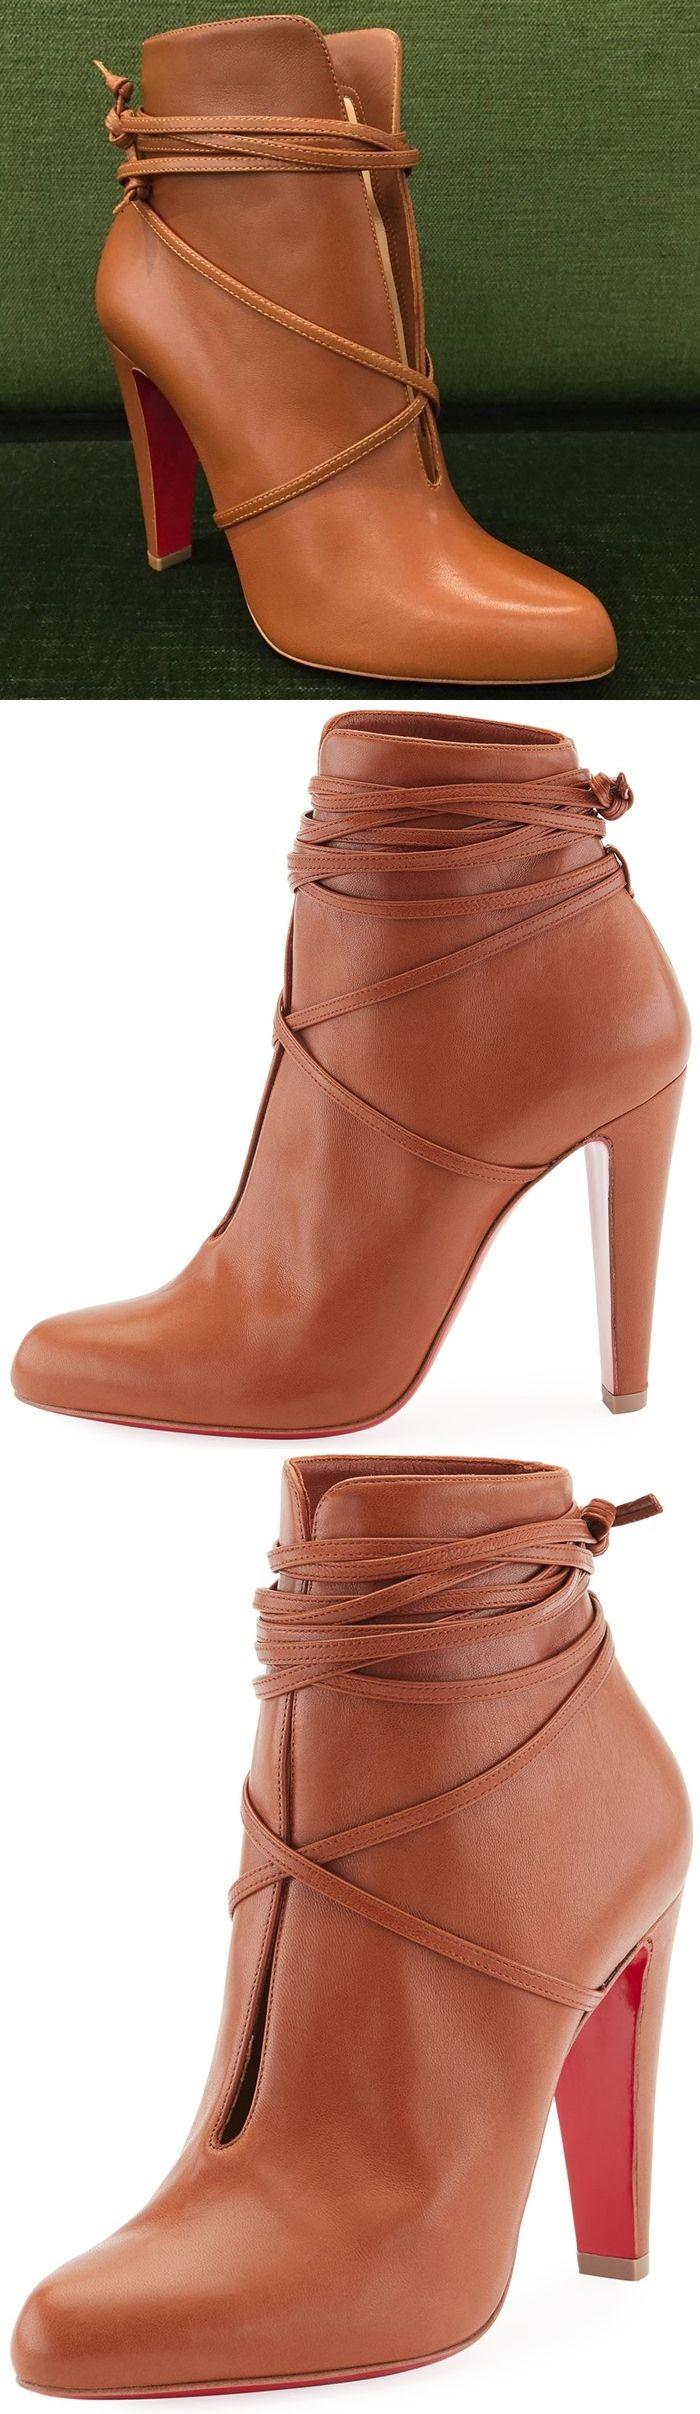 Mariage - Christian Louboutin's Must-Have 'S.I.T. Rain' Leather Ankle Boots